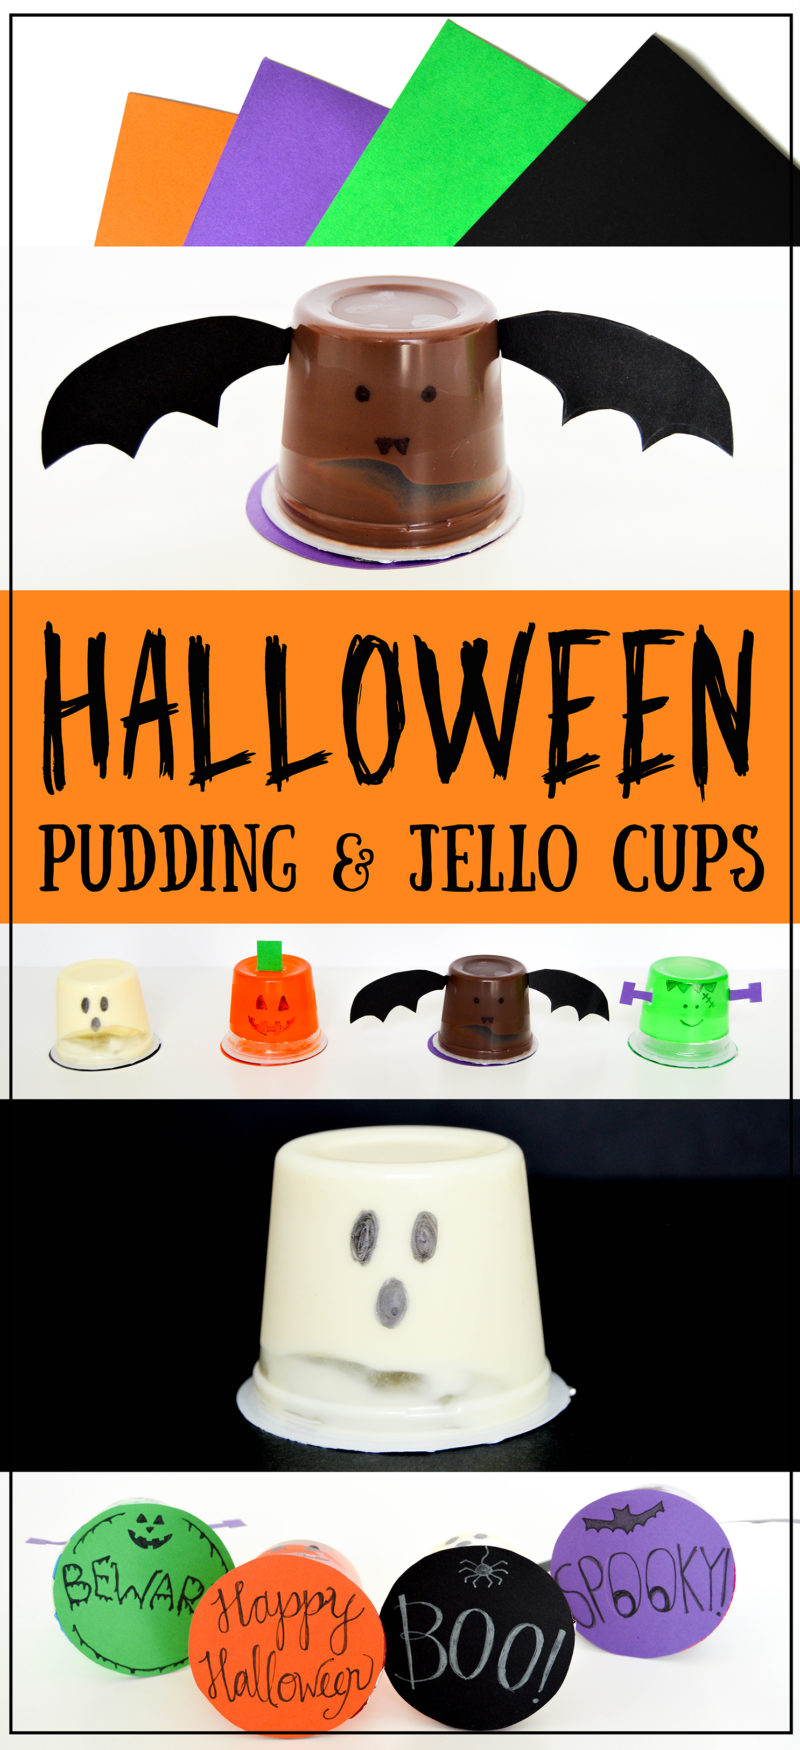 Halloween Pudding Cups & Jello Cups - The DIY Lighthouse